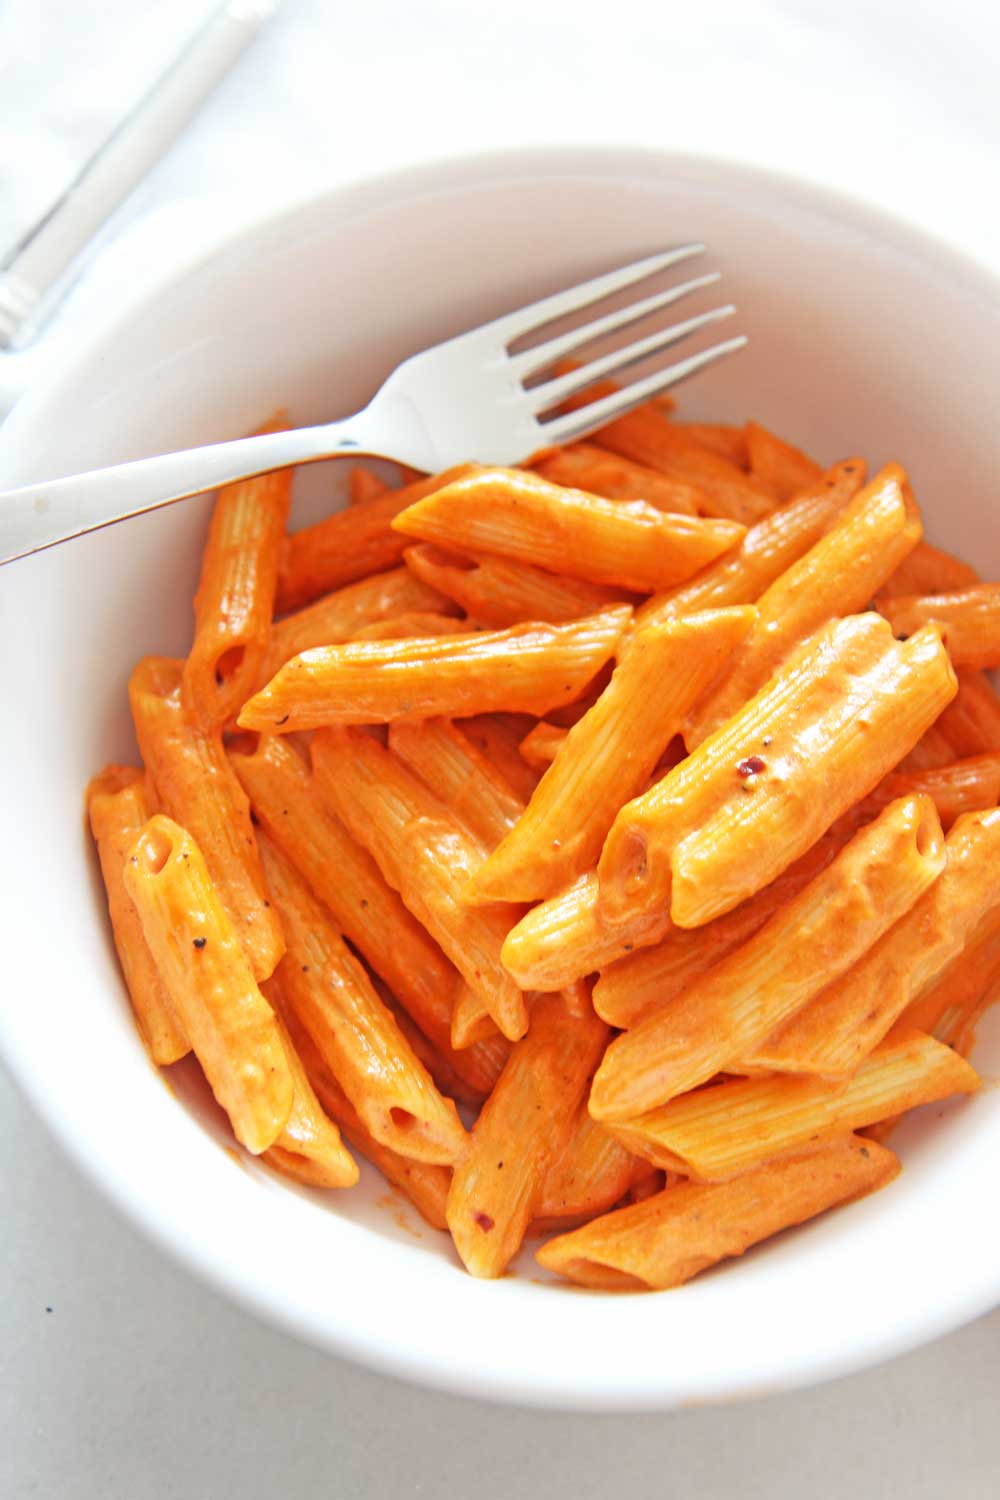 How To Make Penne Alla Vodka Pasta (Carbone copycat recipe). Grab cream, garlic, tomato paste, red pepper flakes, and pasta. This is a 20 minute one pot recipe that is a perfect weeknight dinner or pasta part. This is a copycat Carbone's Spicy Vodka sauce. Happy pasta making. www.ChopHappy.com #penneallavodka #vodkasauce